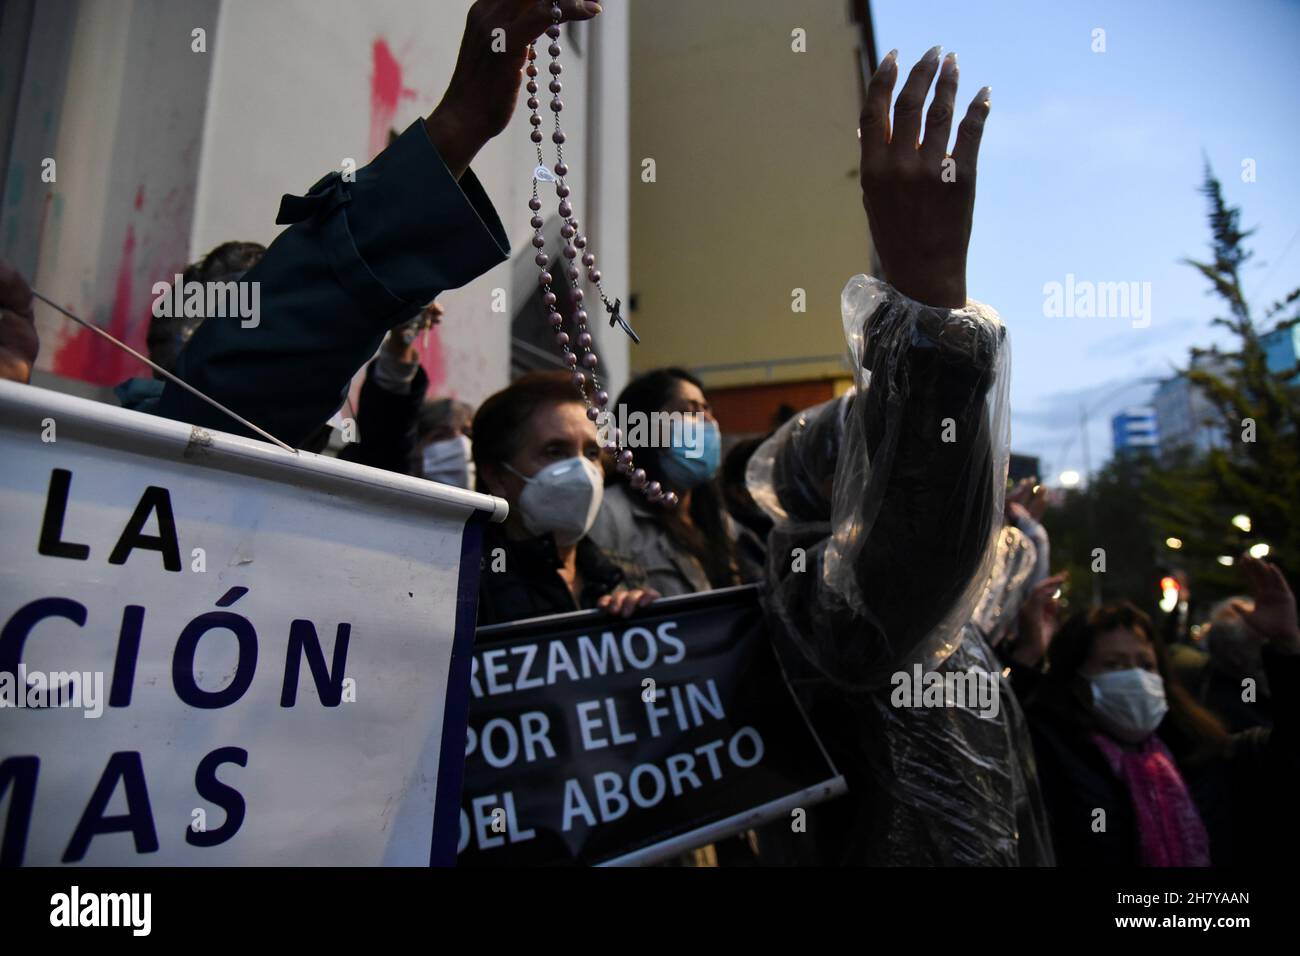 Church members, including one holding a sign reading 'We pray for the end of abortion', stand in front of a church during a protest on International Day for the Elimination of Violence Against Women, in La Paz, Bolivia November 25, 2021. REUTERS/Claudia Morales Stock Photo